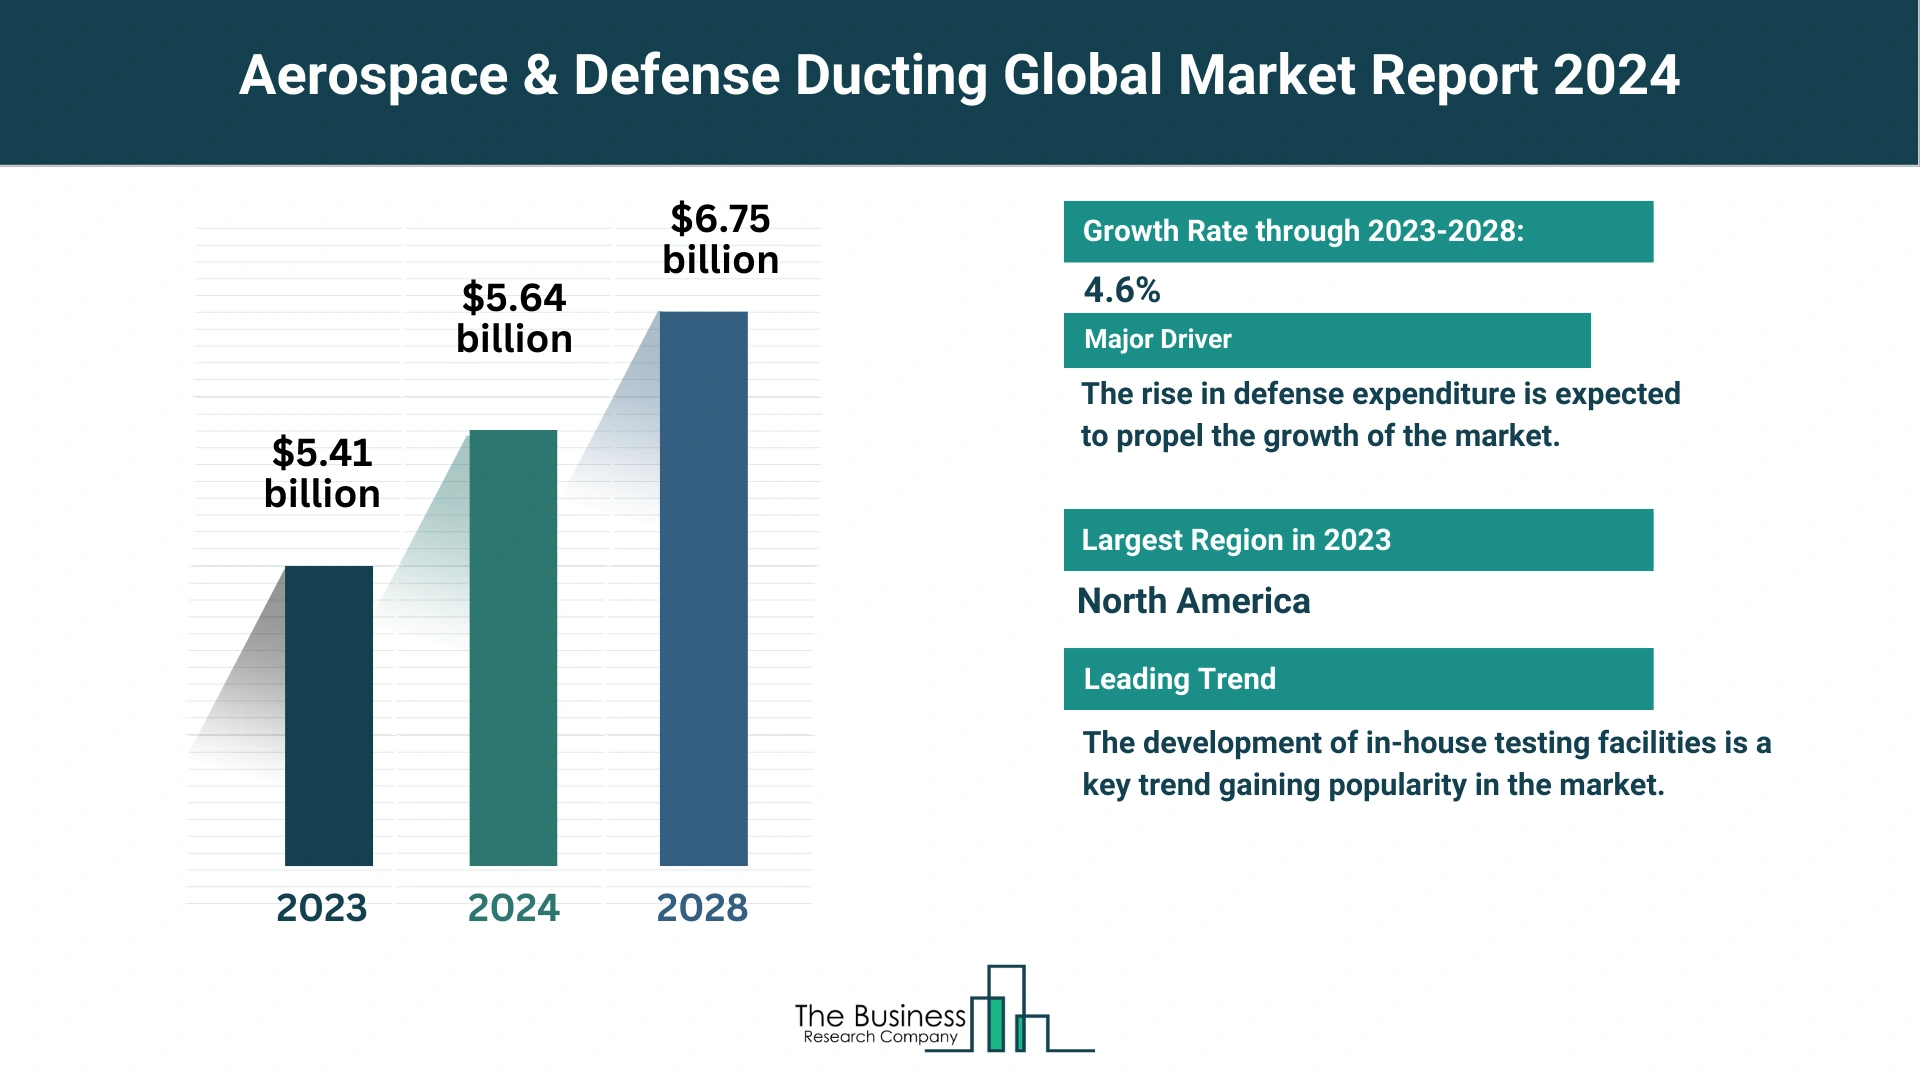 Global Aerospace & Defense Ducting Market Report 2024: Size, Drivers, And Top Segments